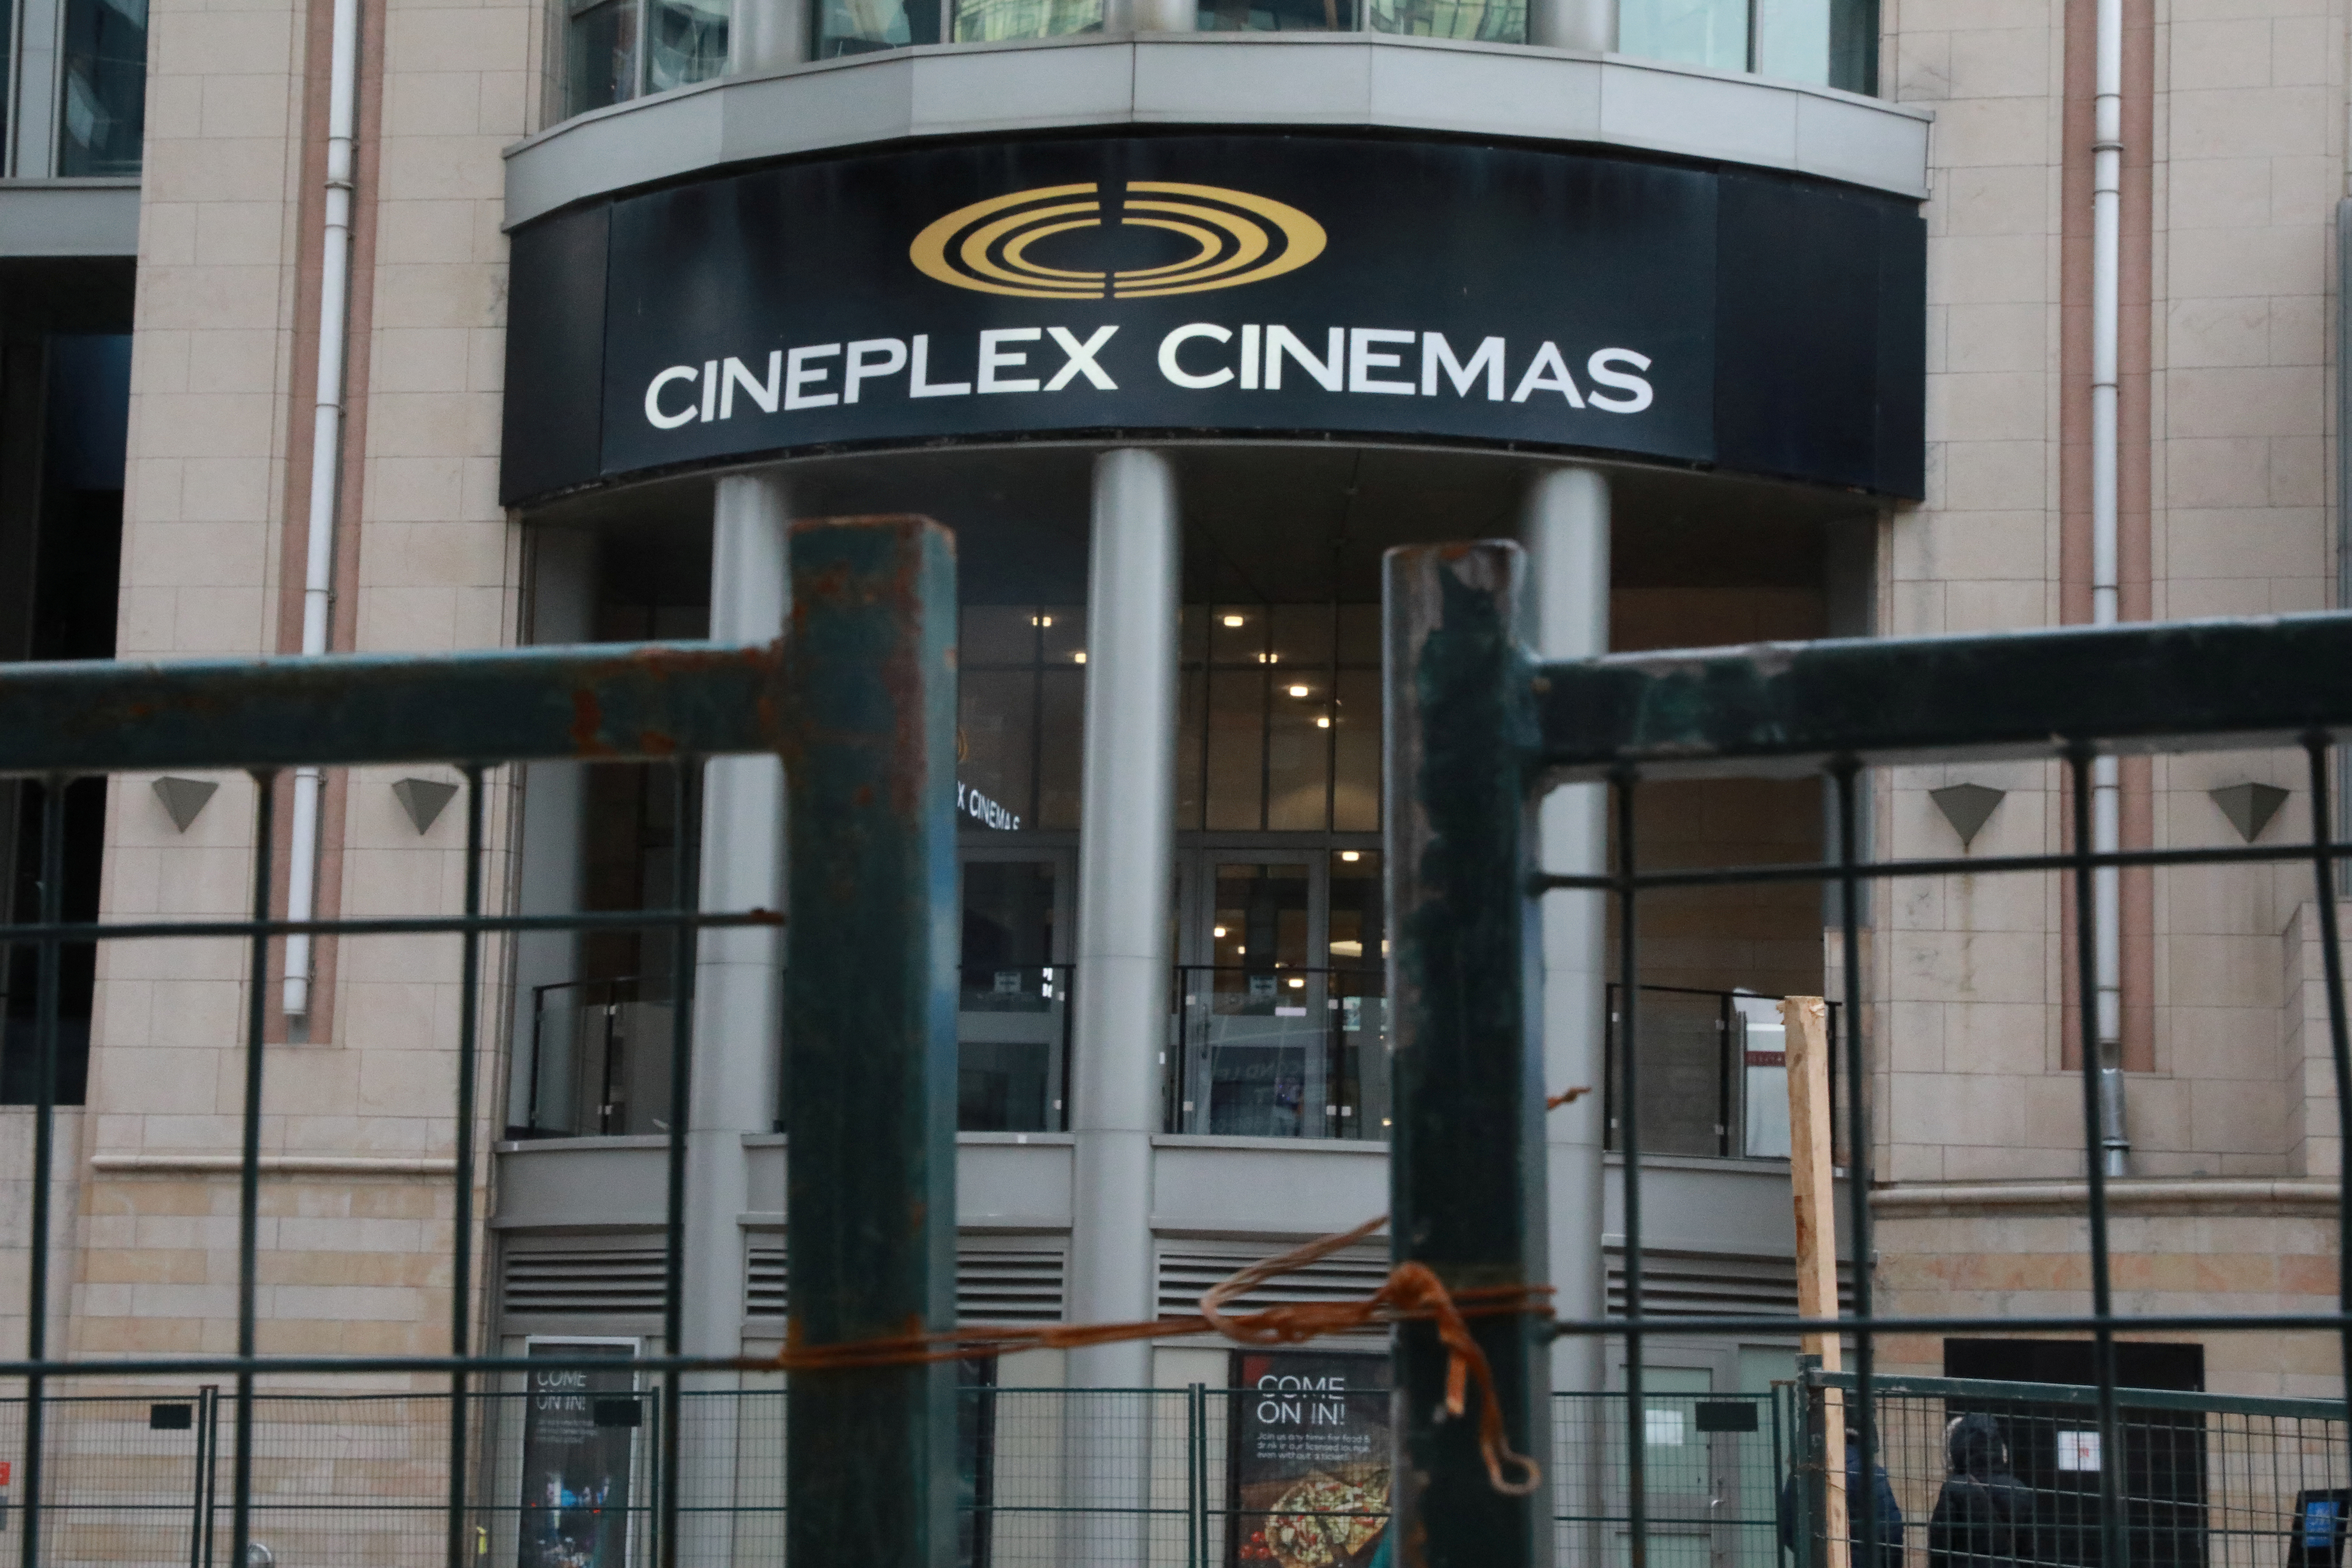 A Cineplex movie theatre sign is seen over a construction gate on Yonge street in Toronto